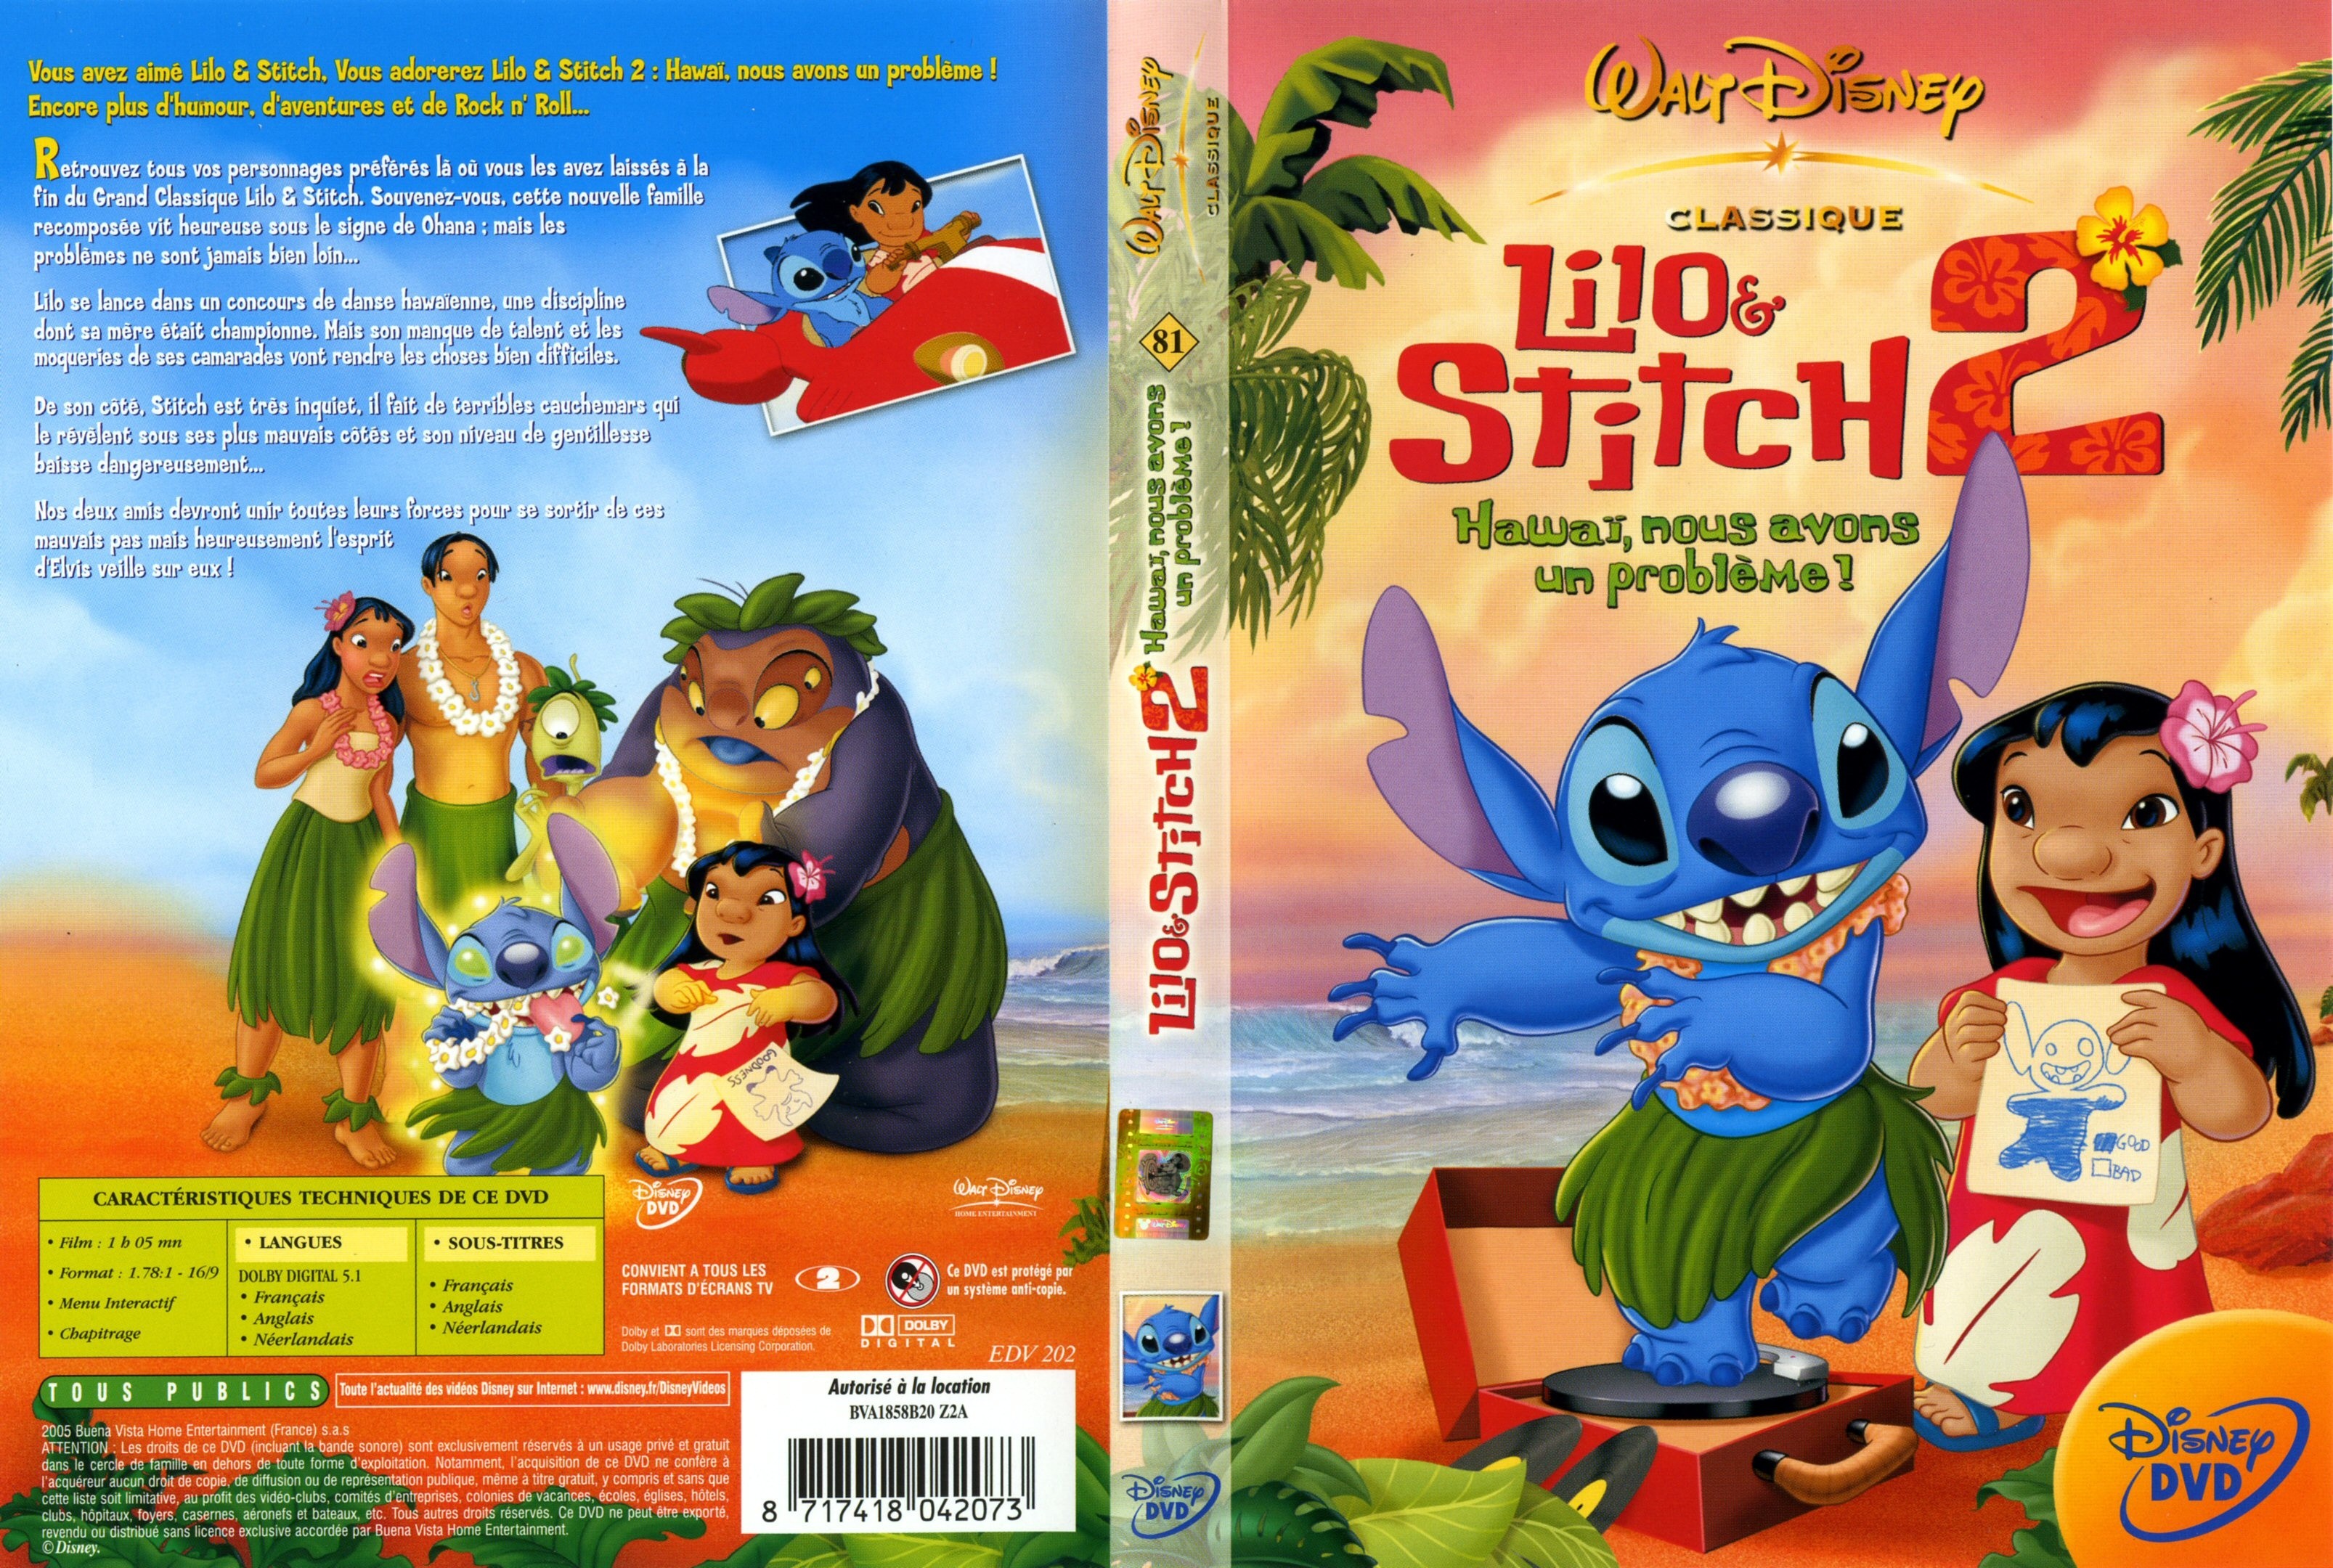 In my review of Stitch the Movie I praised the Lilo and Stitch franchise, b...